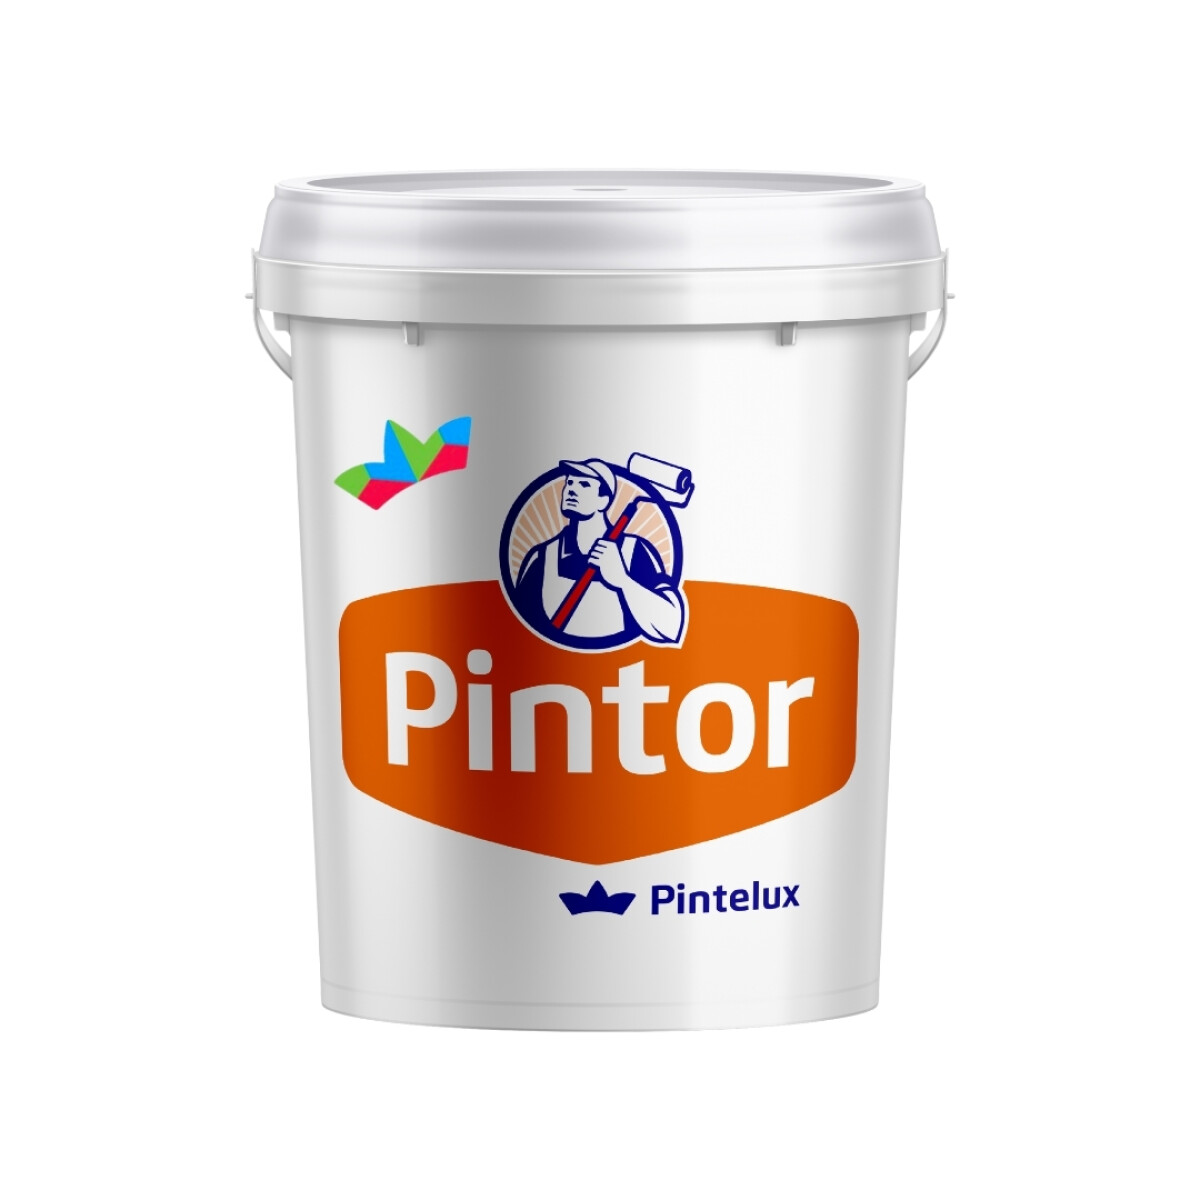 PINTOR MULTIPROPOSITO MONT BLANCO - 1LT 